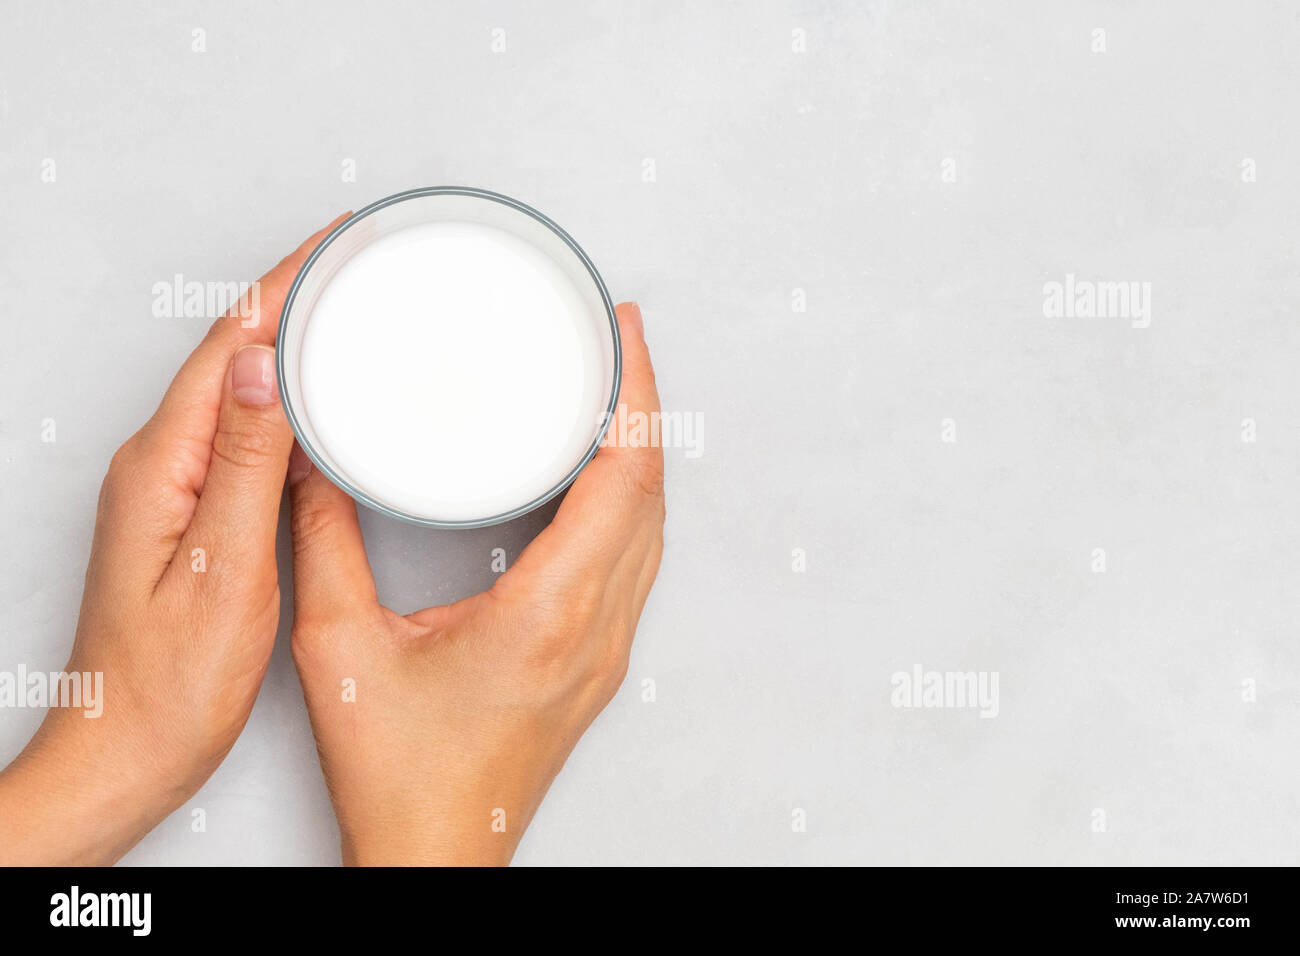 Woman hands holding a glass of ayran (kefir) fermented drink on grey concrete background Stock Photo